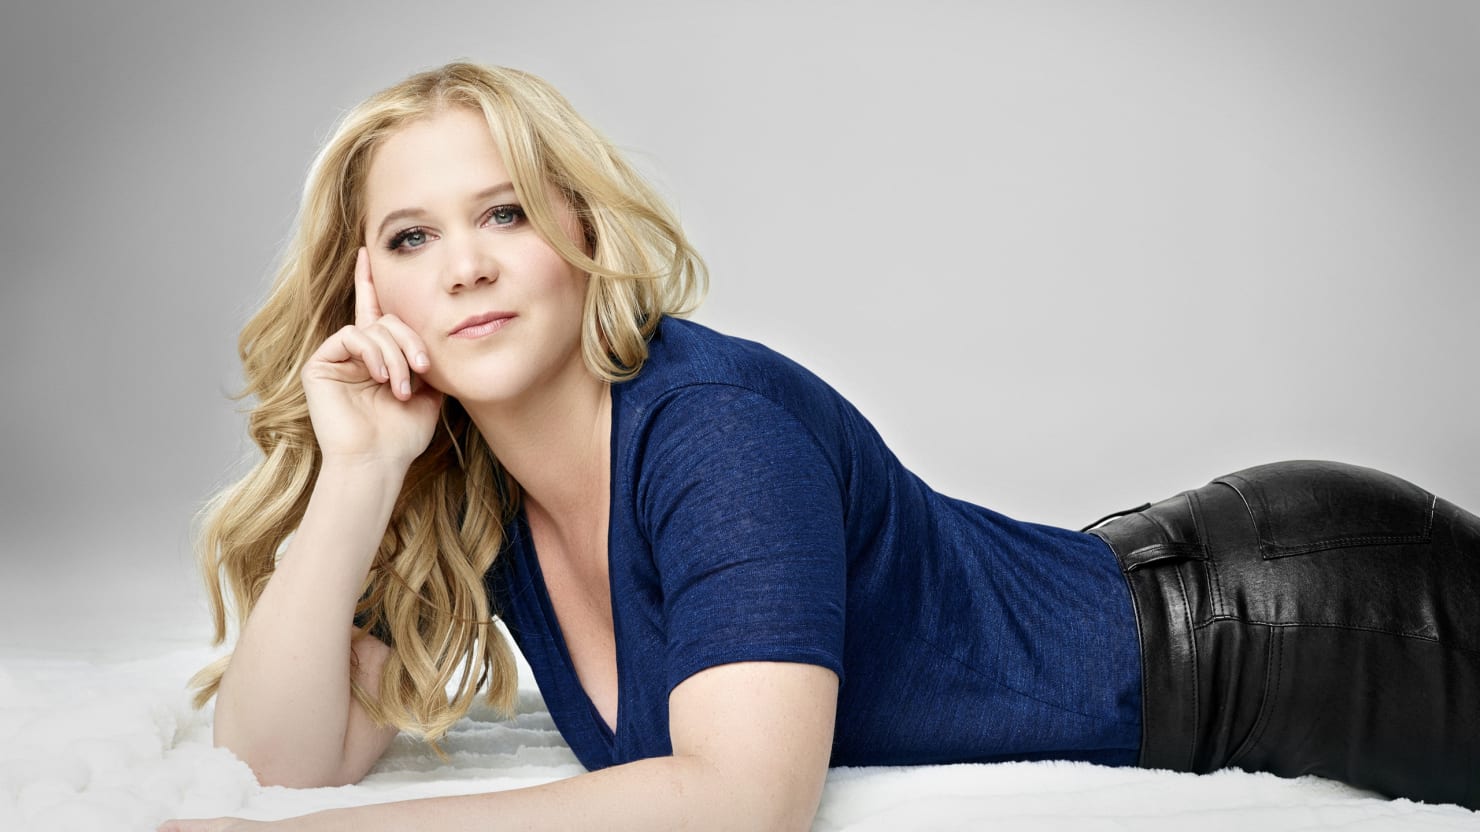 Amy Schumer Blowjob - Comedy's R-Rated Queen Amy Schumer Is Raunchier Than Ever